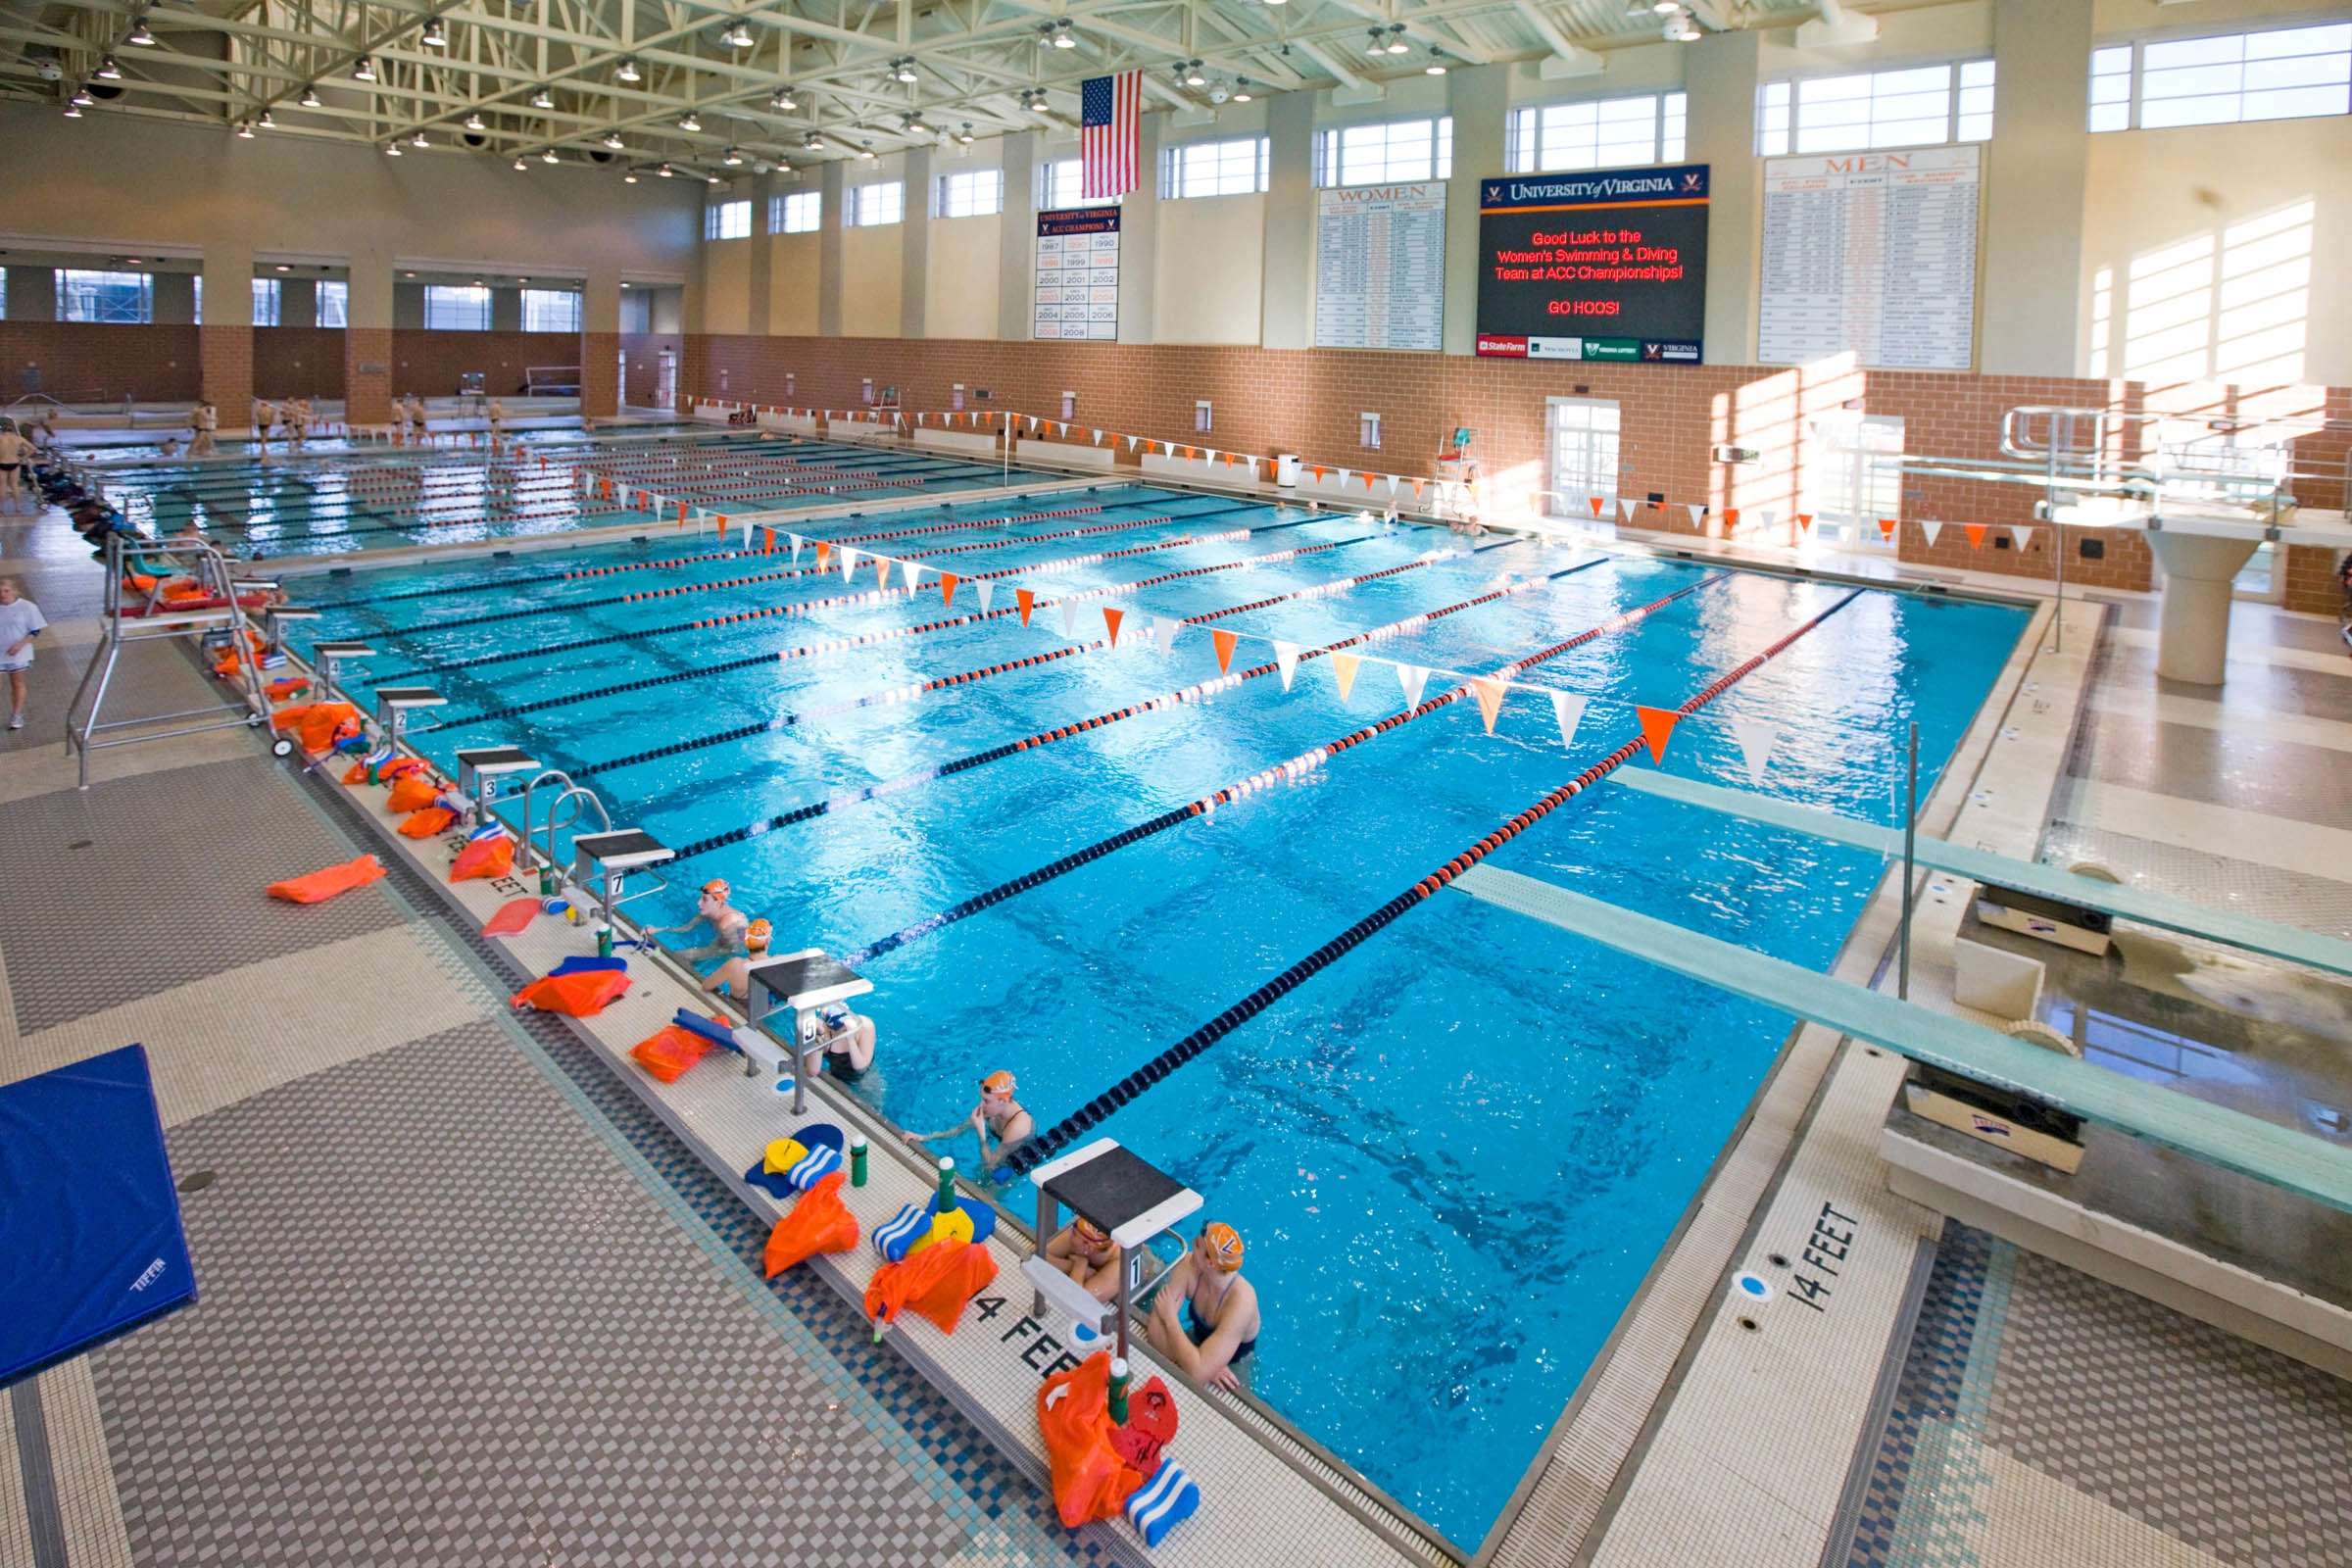 Students at the University of Virginia olympic pool